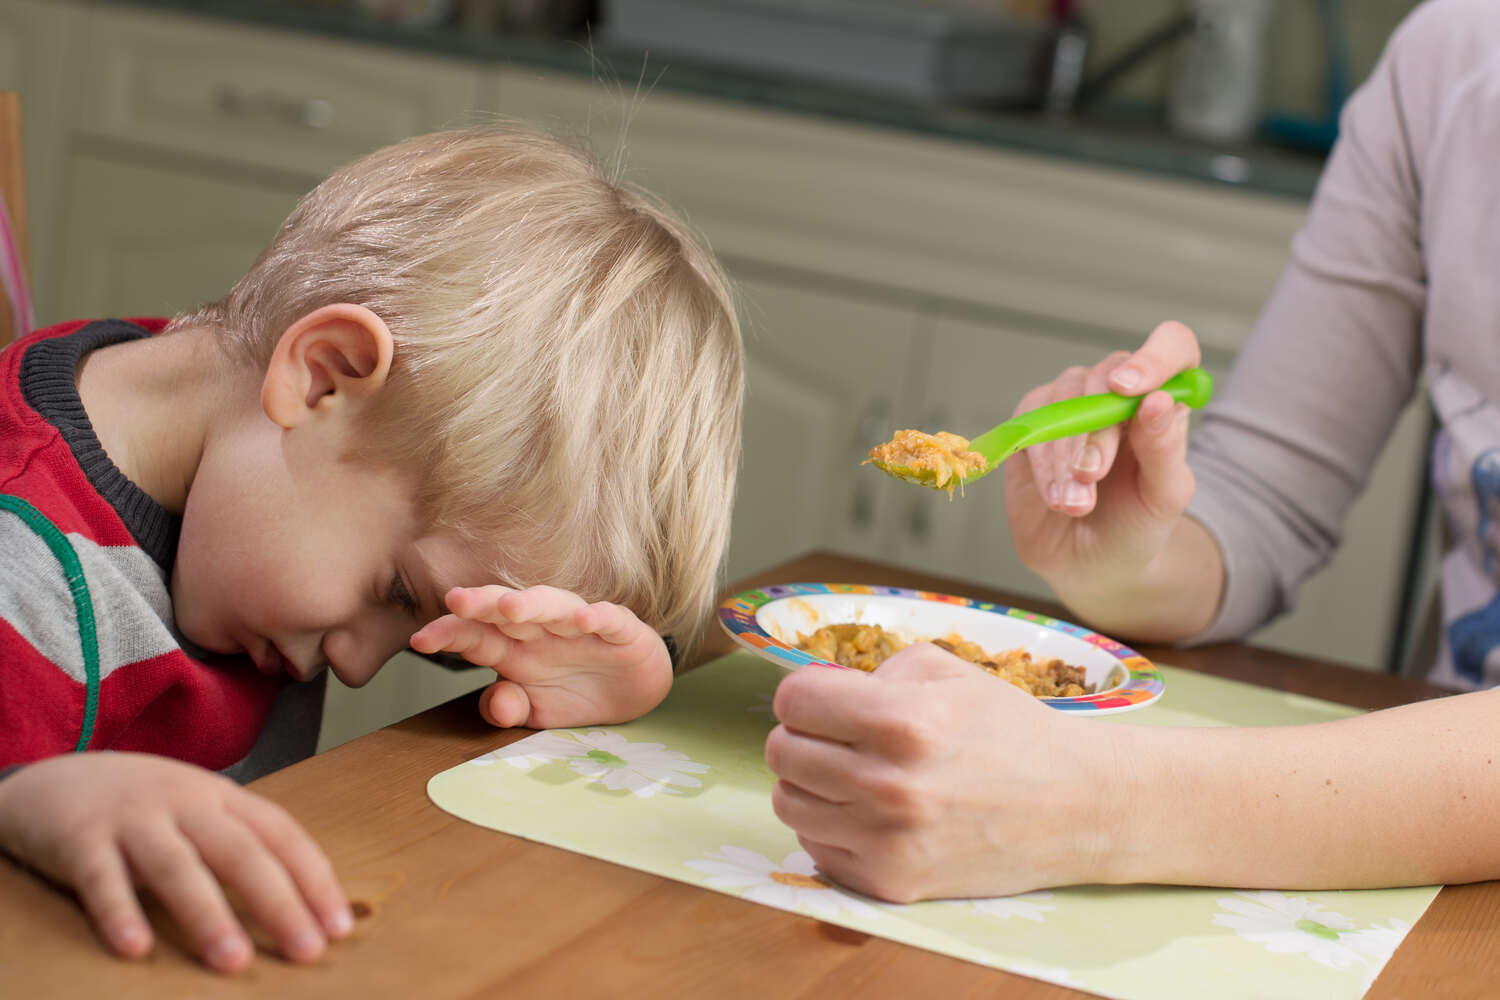 Find the reason behind fussy eating in toddlers